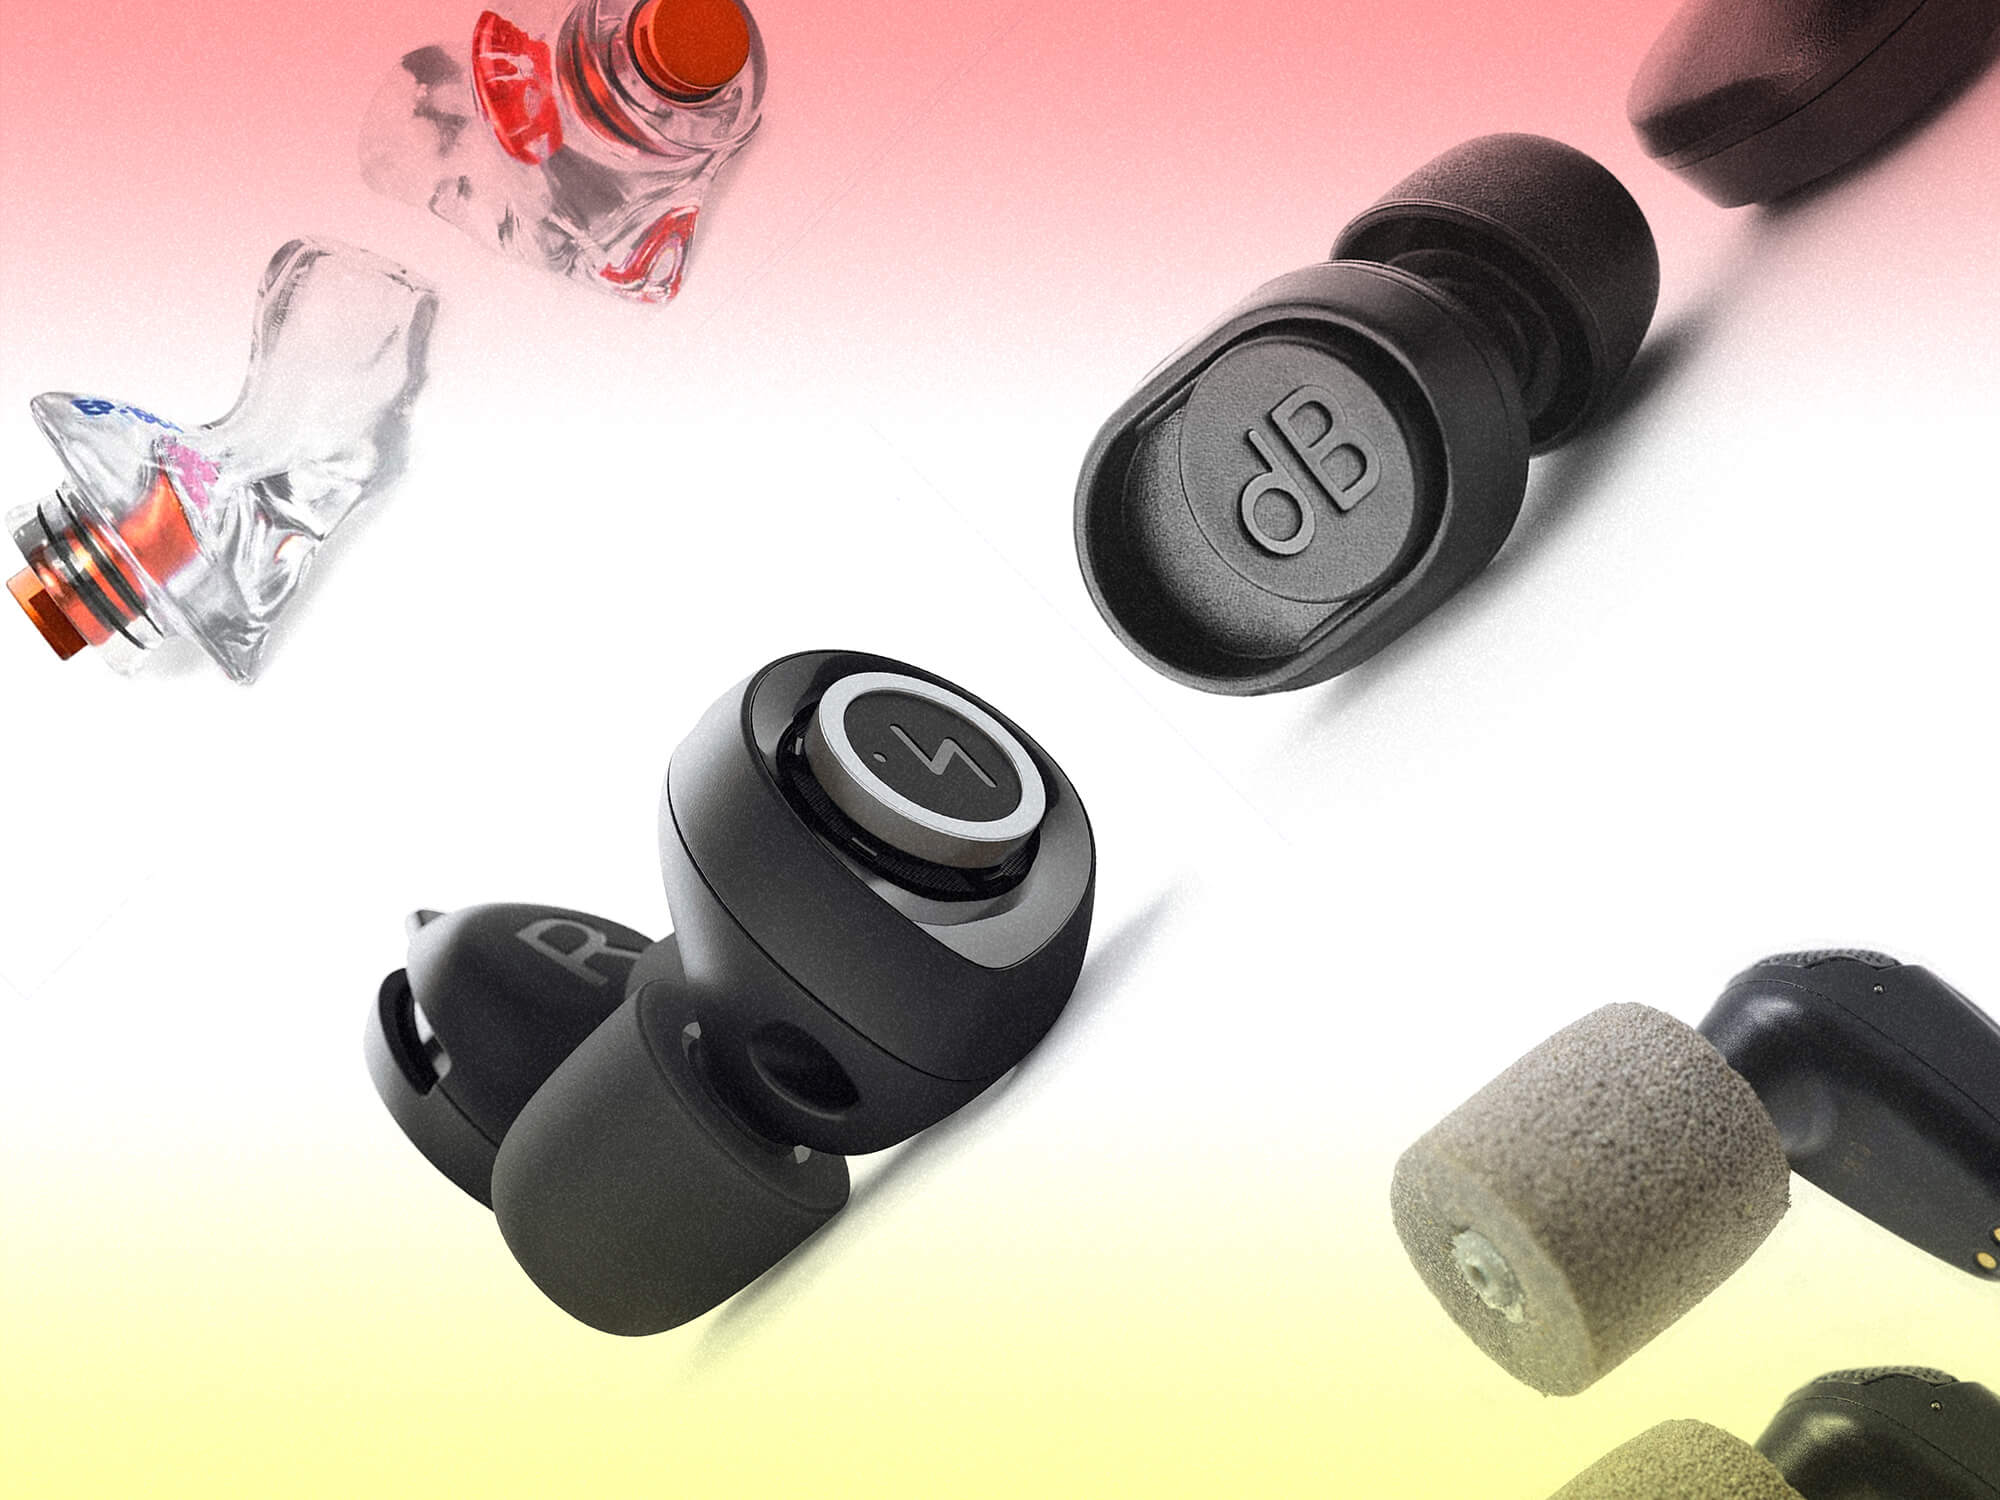 Best Earplugs for gigs and festivals 2022